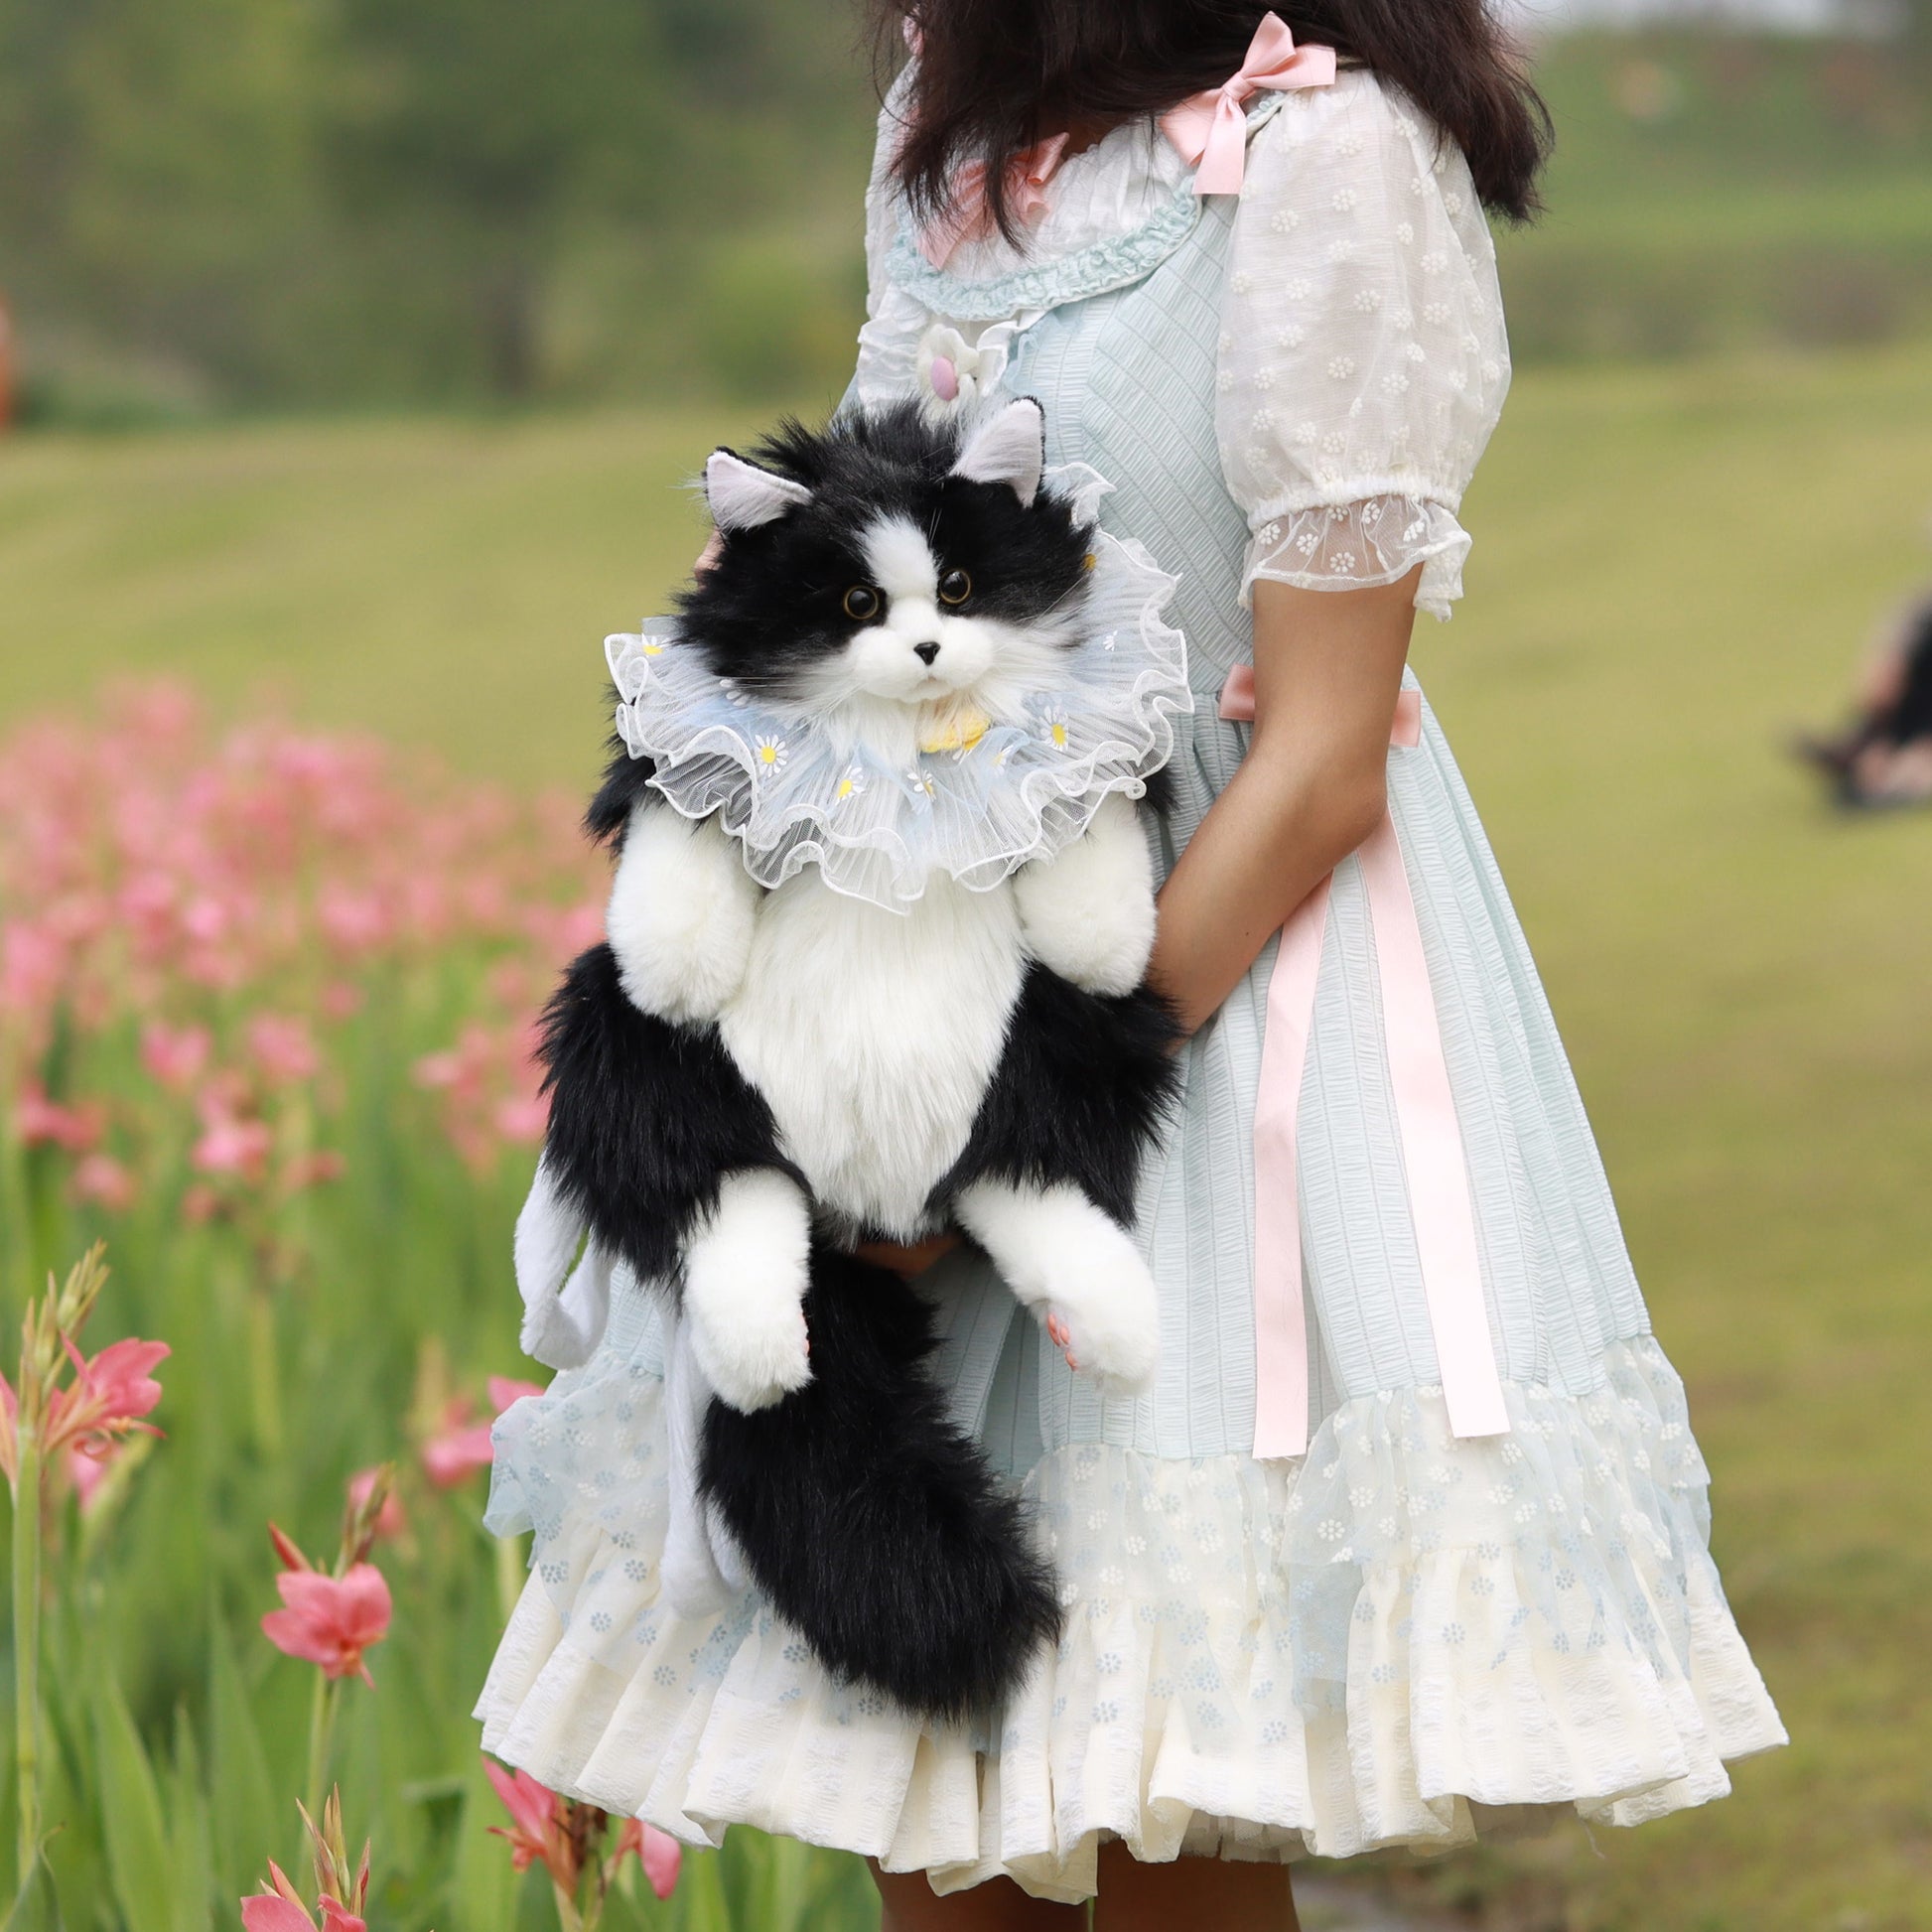 Chongker Stuffed Realistic Black Cat Shaped Backpack Women - Perfect Fashion Accessory & Unique Gift for Cat Lovers - Chongker